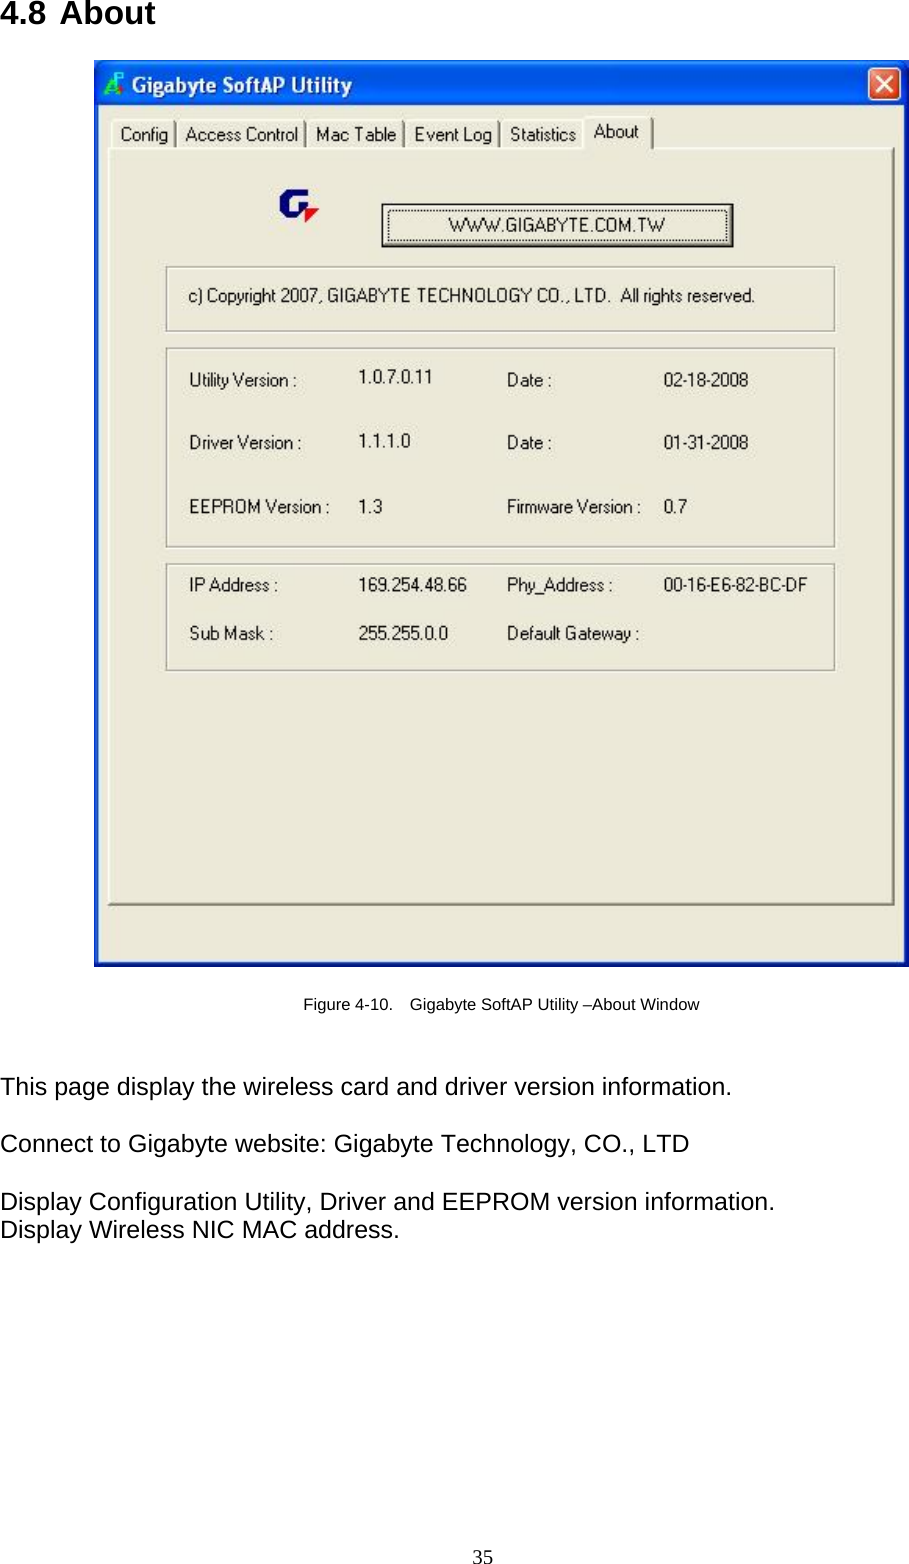 4.8 About    Figure 4-10.    Gigabyte SoftAP Utility –About Window   This page display the wireless card and driver version information.  Connect to Gigabyte website: Gigabyte Technology, CO., LTD  Display Configuration Utility, Driver and EEPROM version information. Display Wireless NIC MAC address.  35   